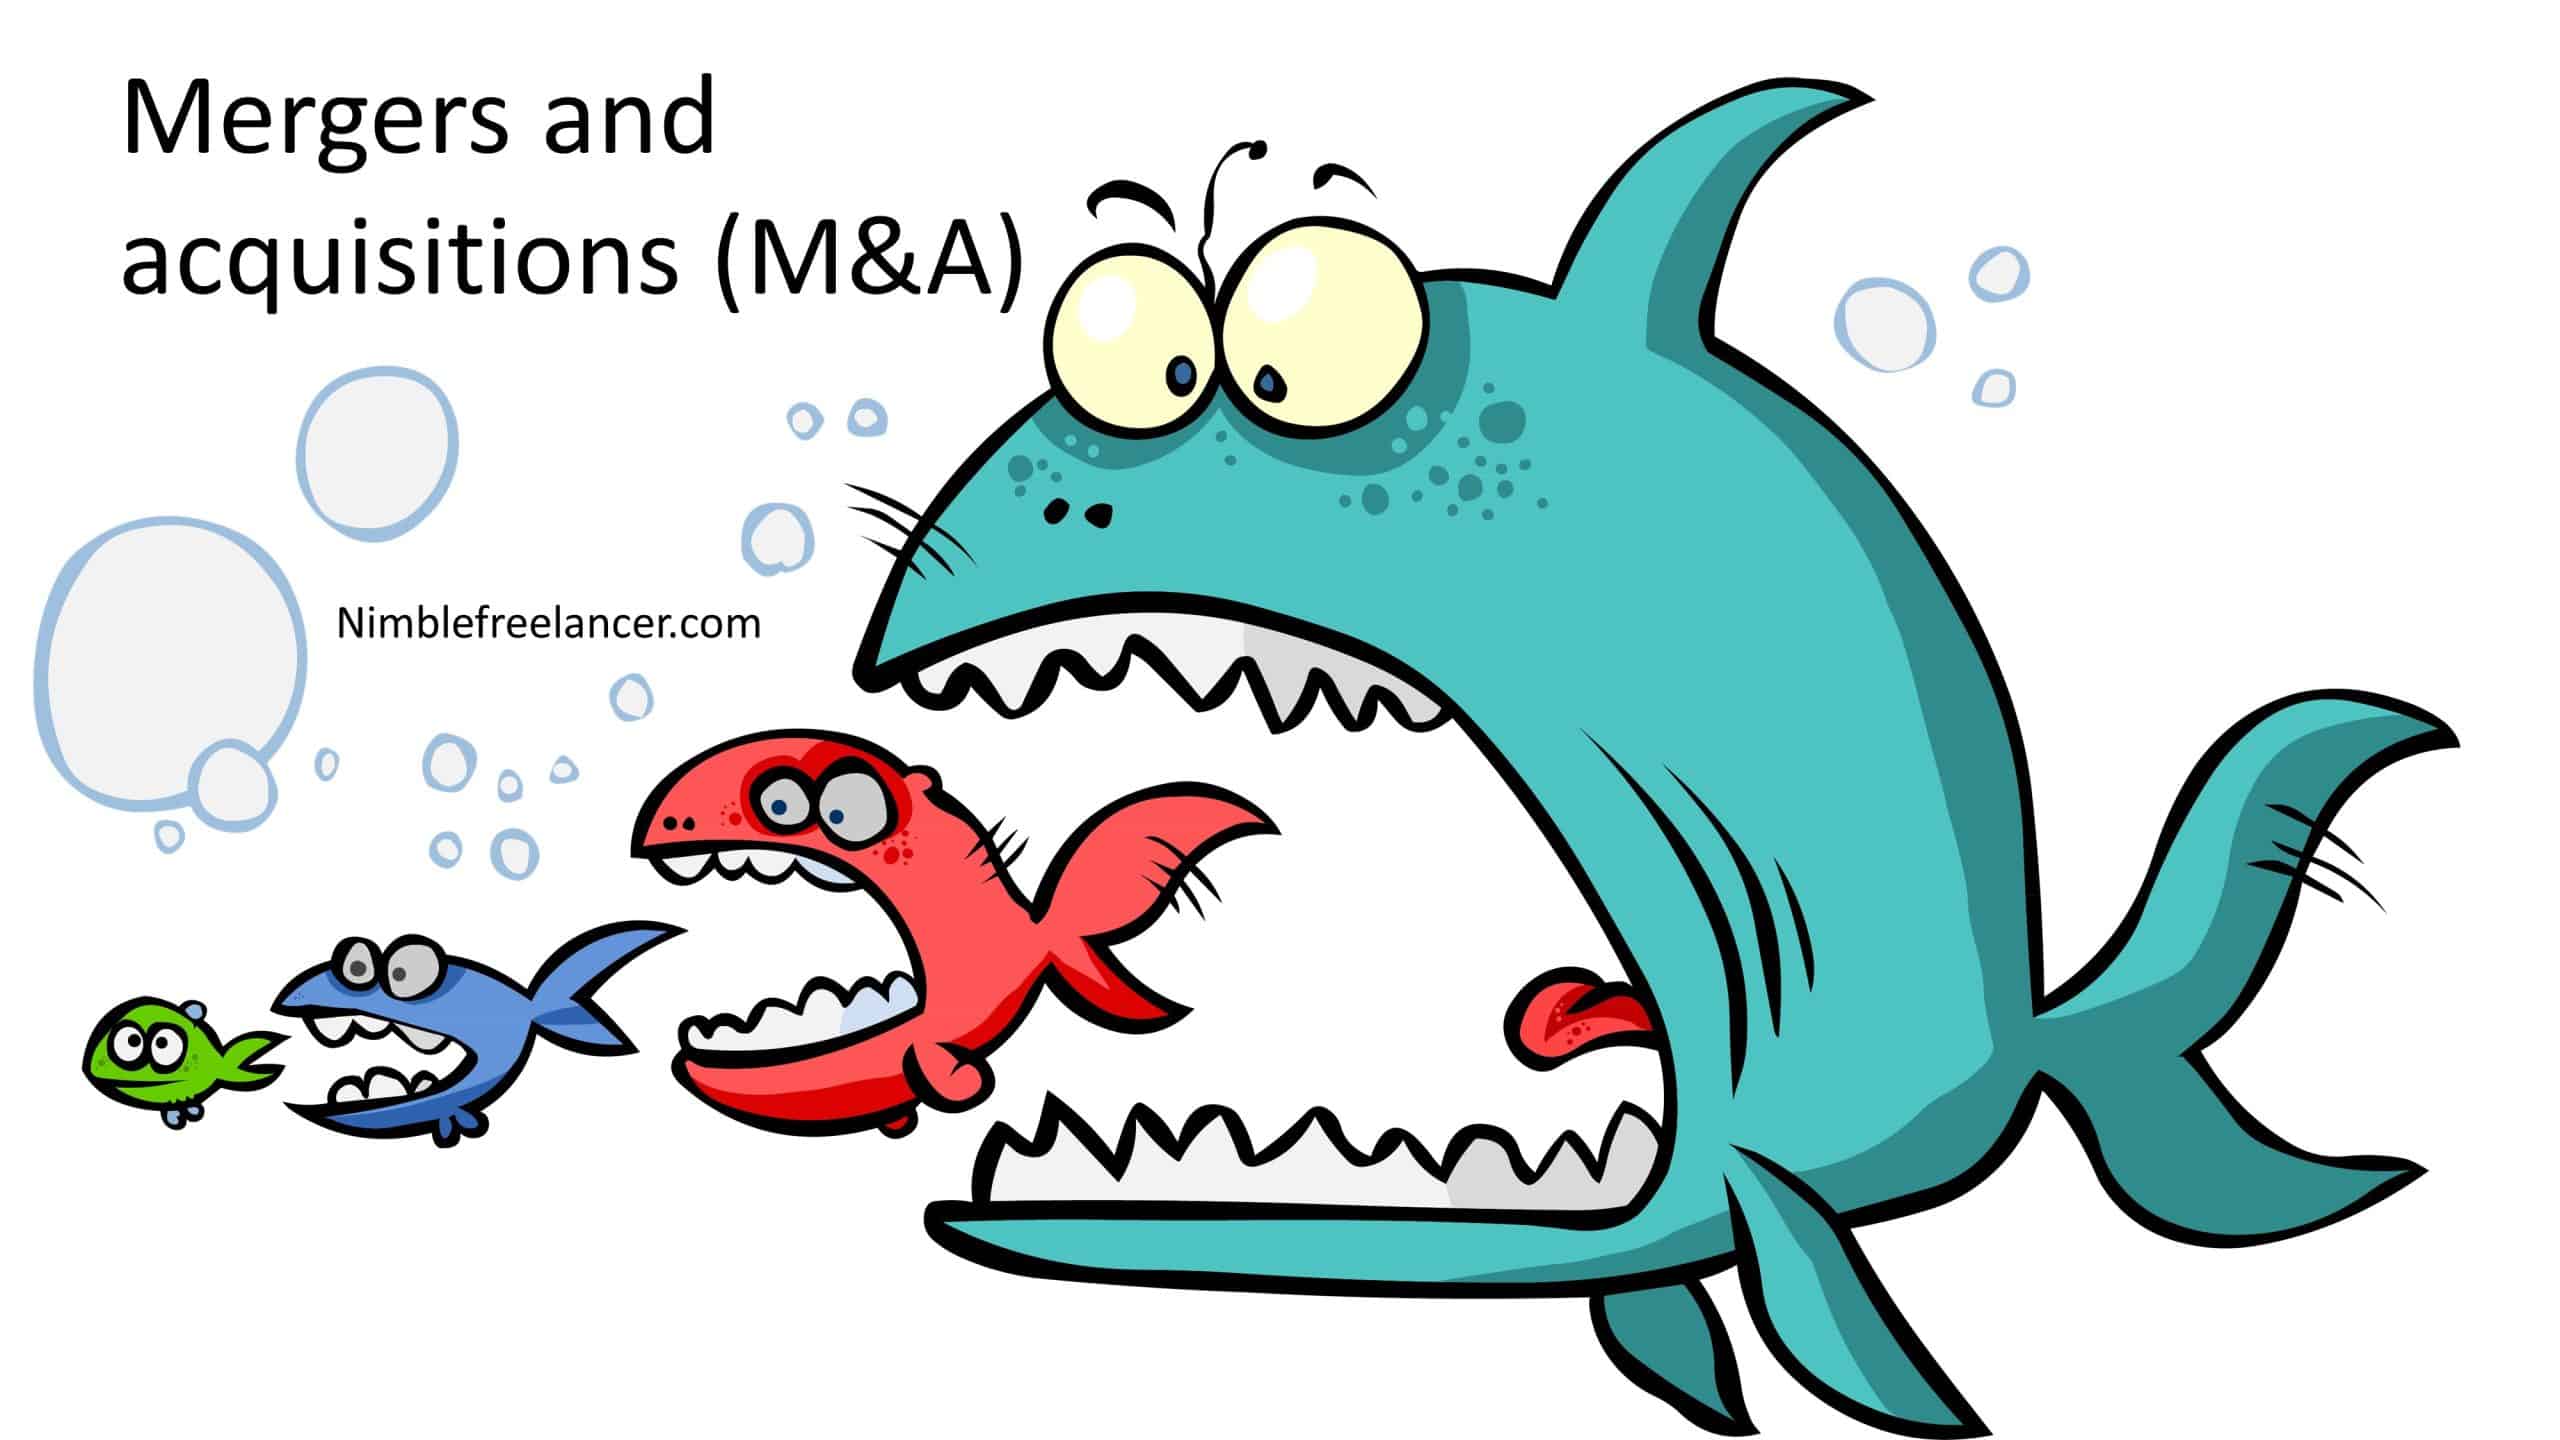 mergers and acquisitions (M&A)